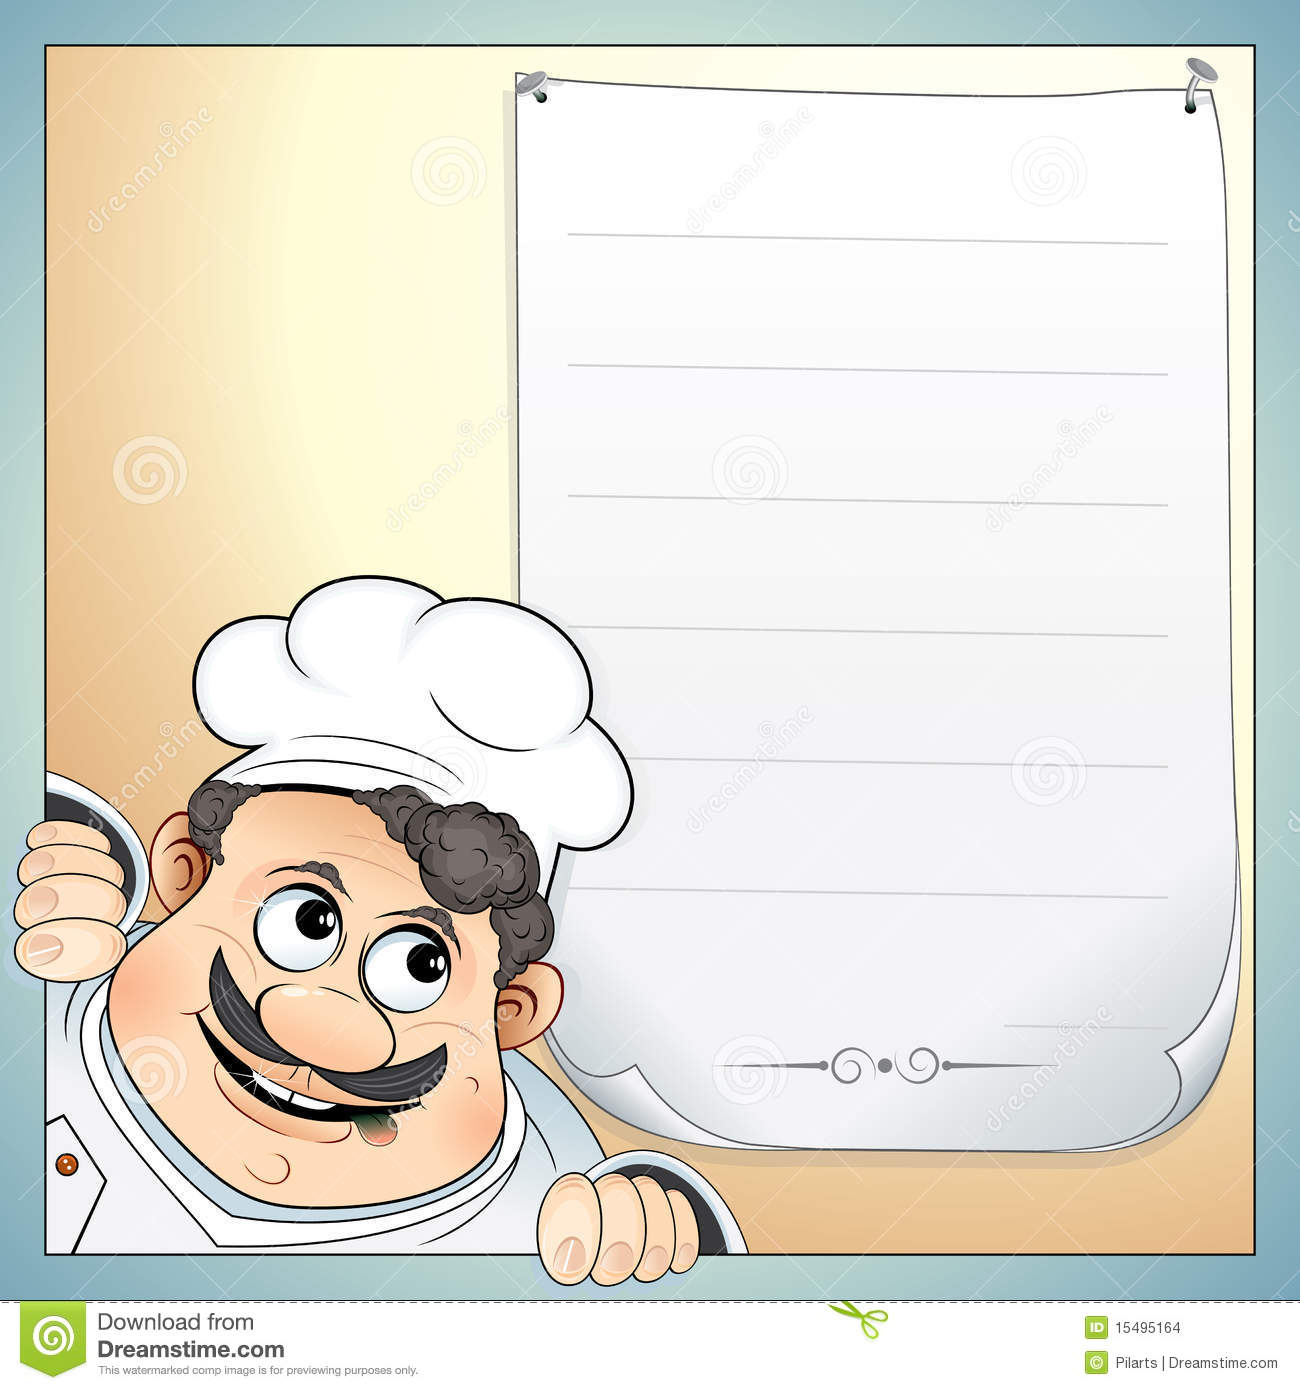 Chef With Menu Stock Images   Image  15495164